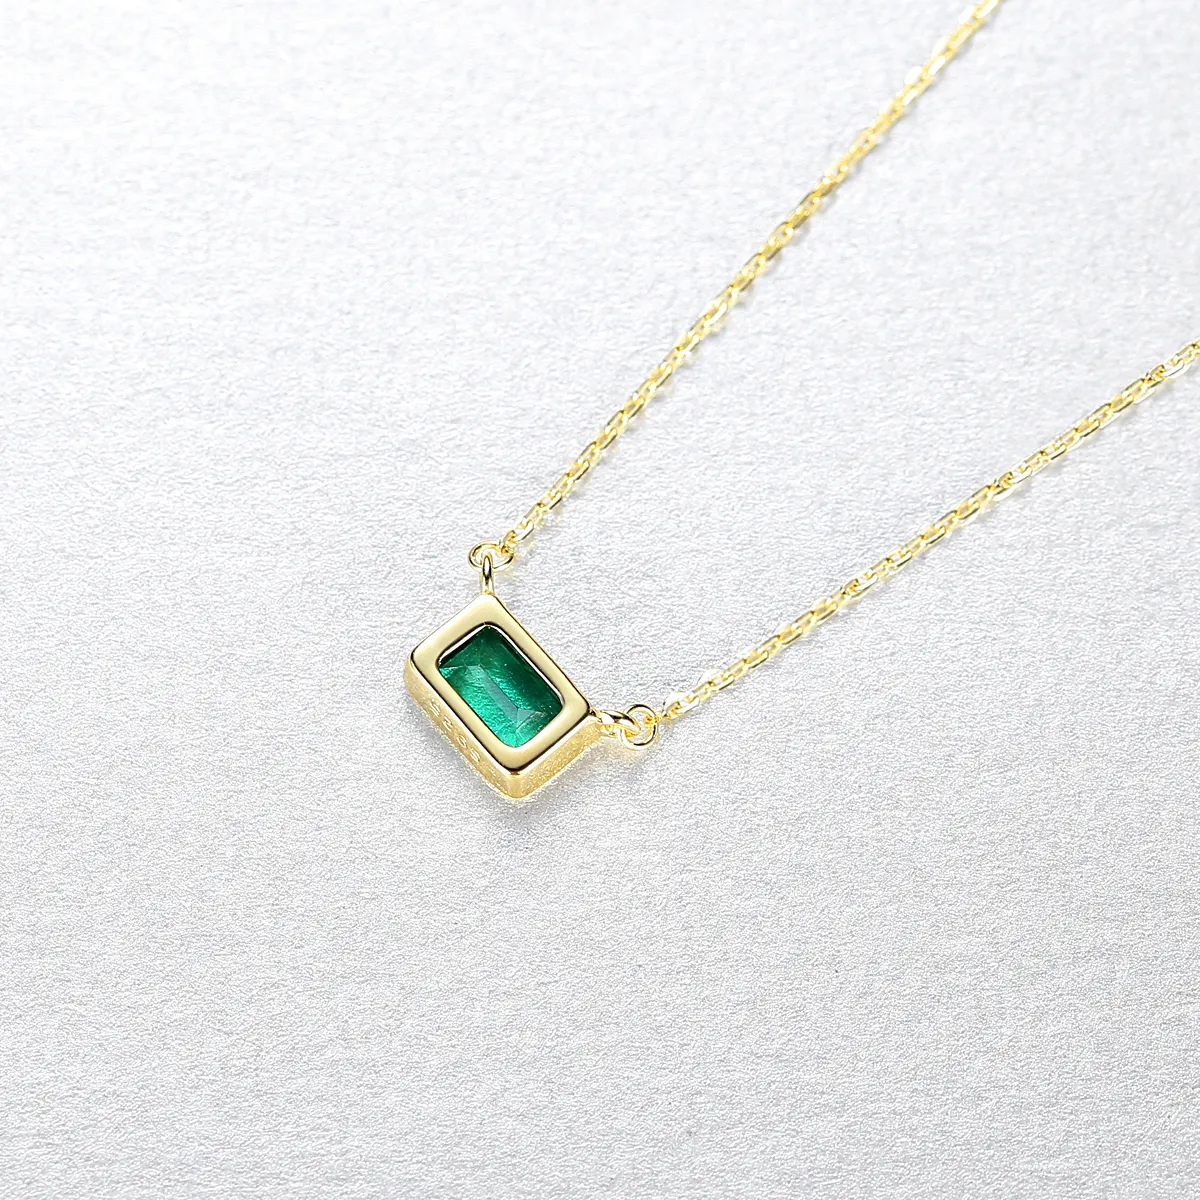 Silver Chain Necklaces CZCITY Square Emerald Cut Green Stone 925 Sterling Silver Fashion Chain 2021 Trendy Pendant Necklace Woman Jewelry